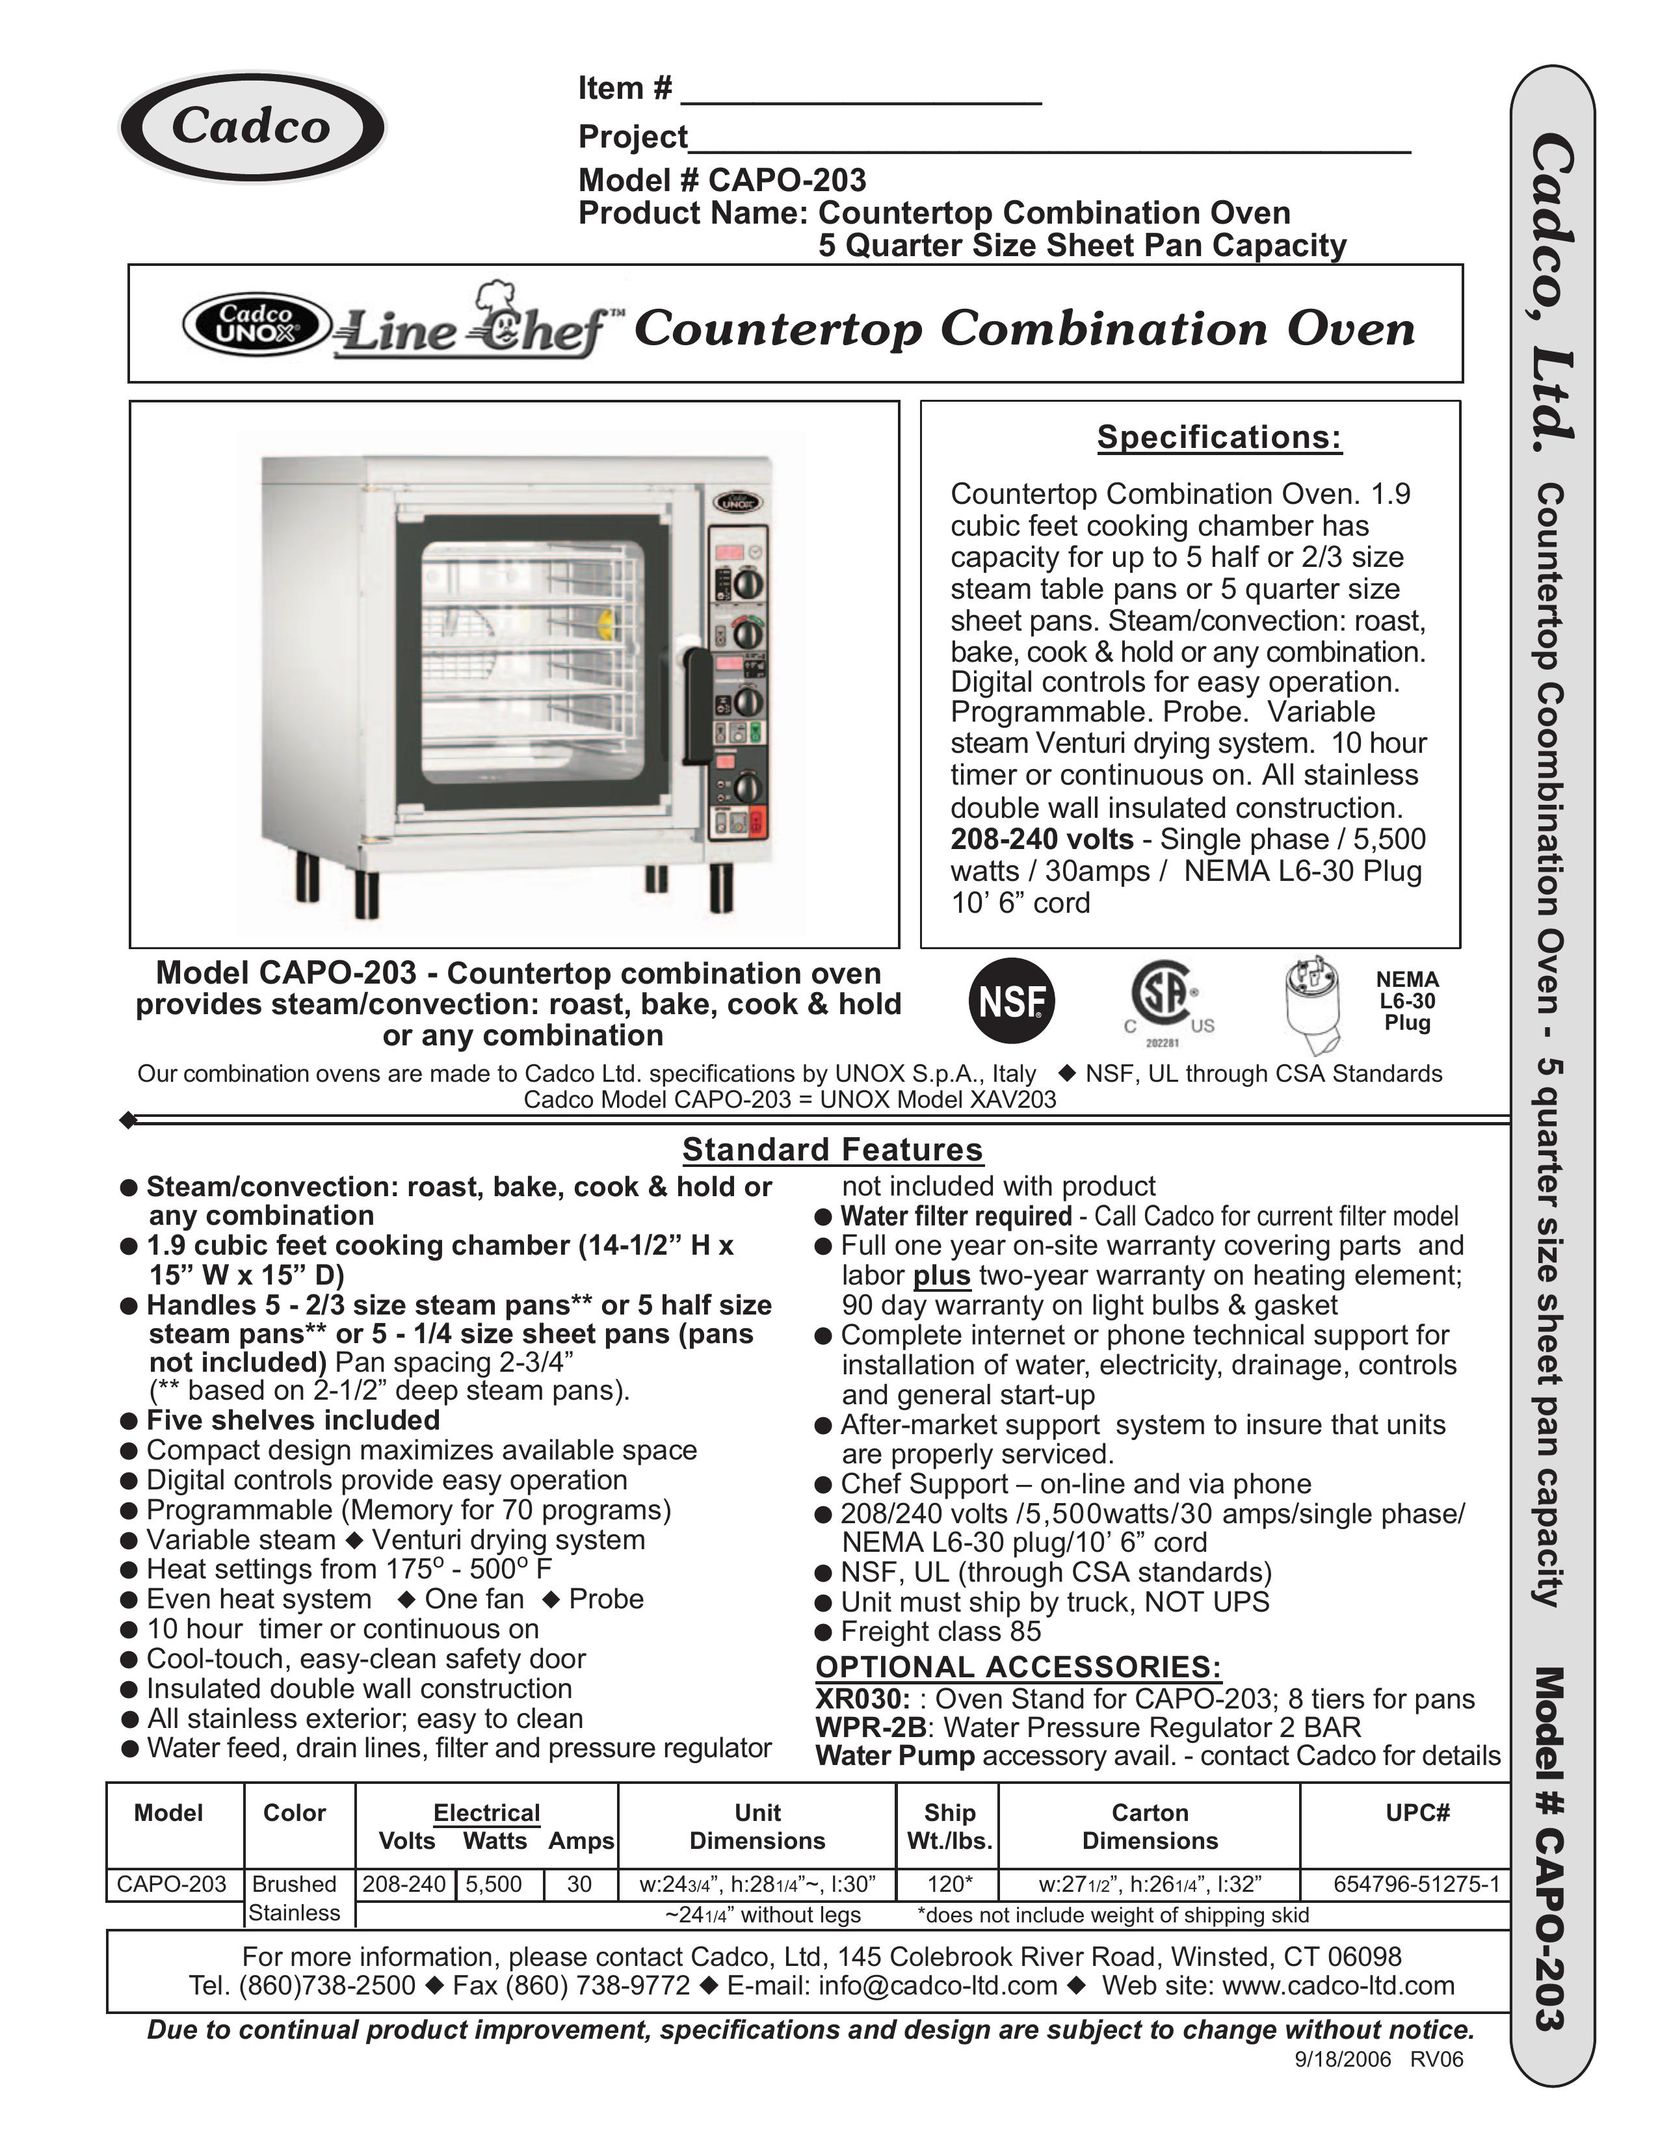 Cadco CAPO-203 Microwave Oven User Manual